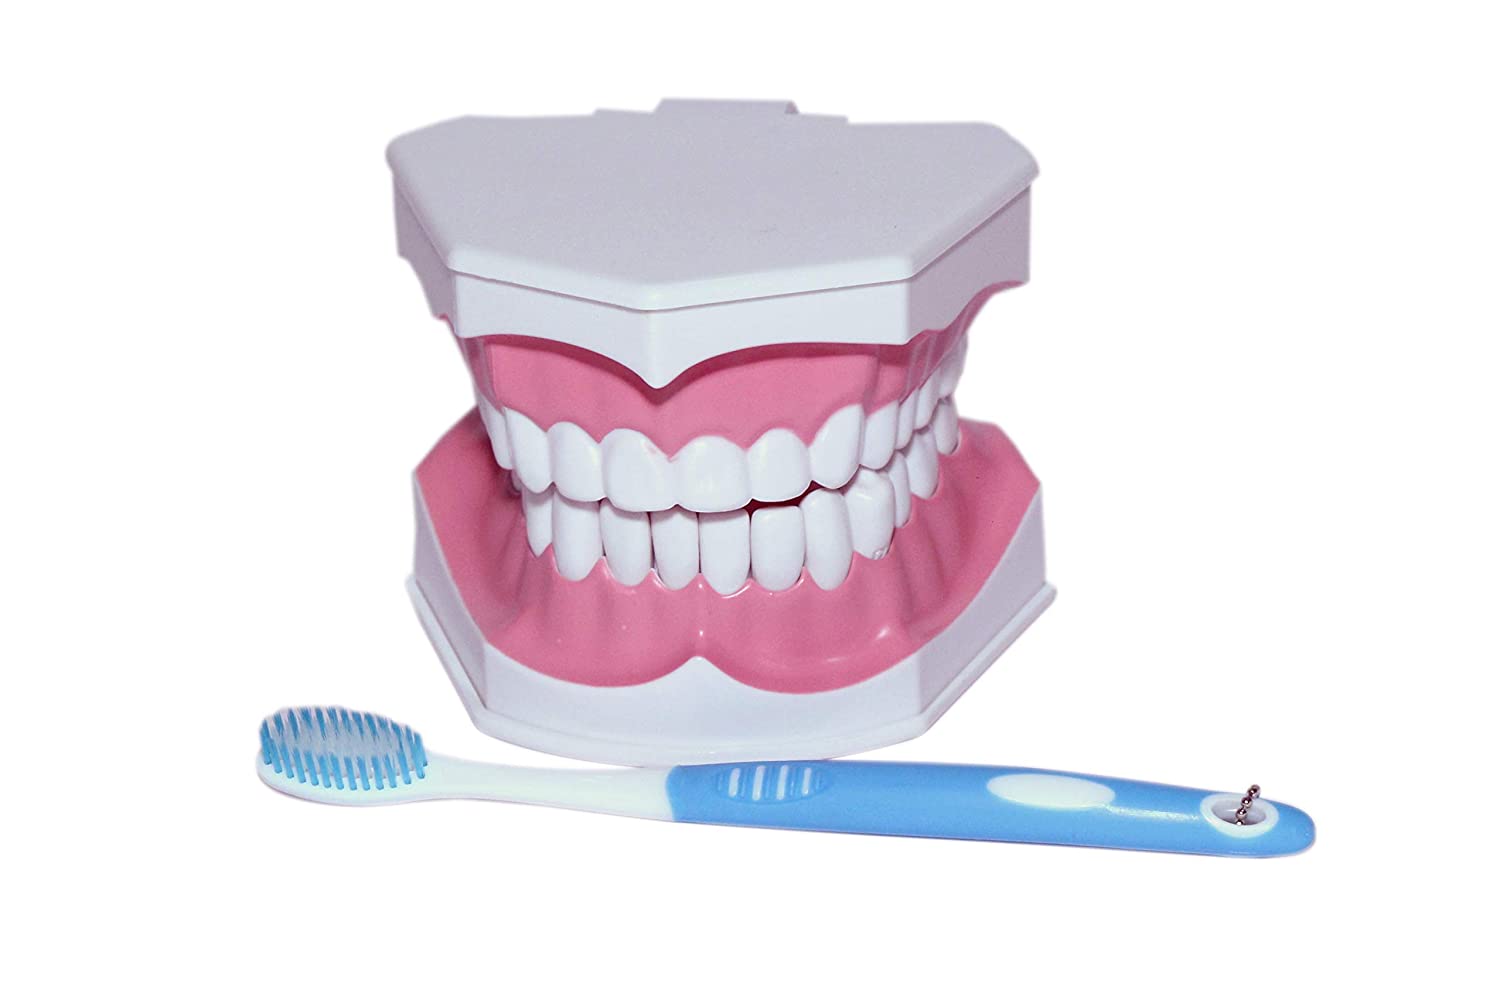 Oral Healthcare Dental Model With Removable Teeth